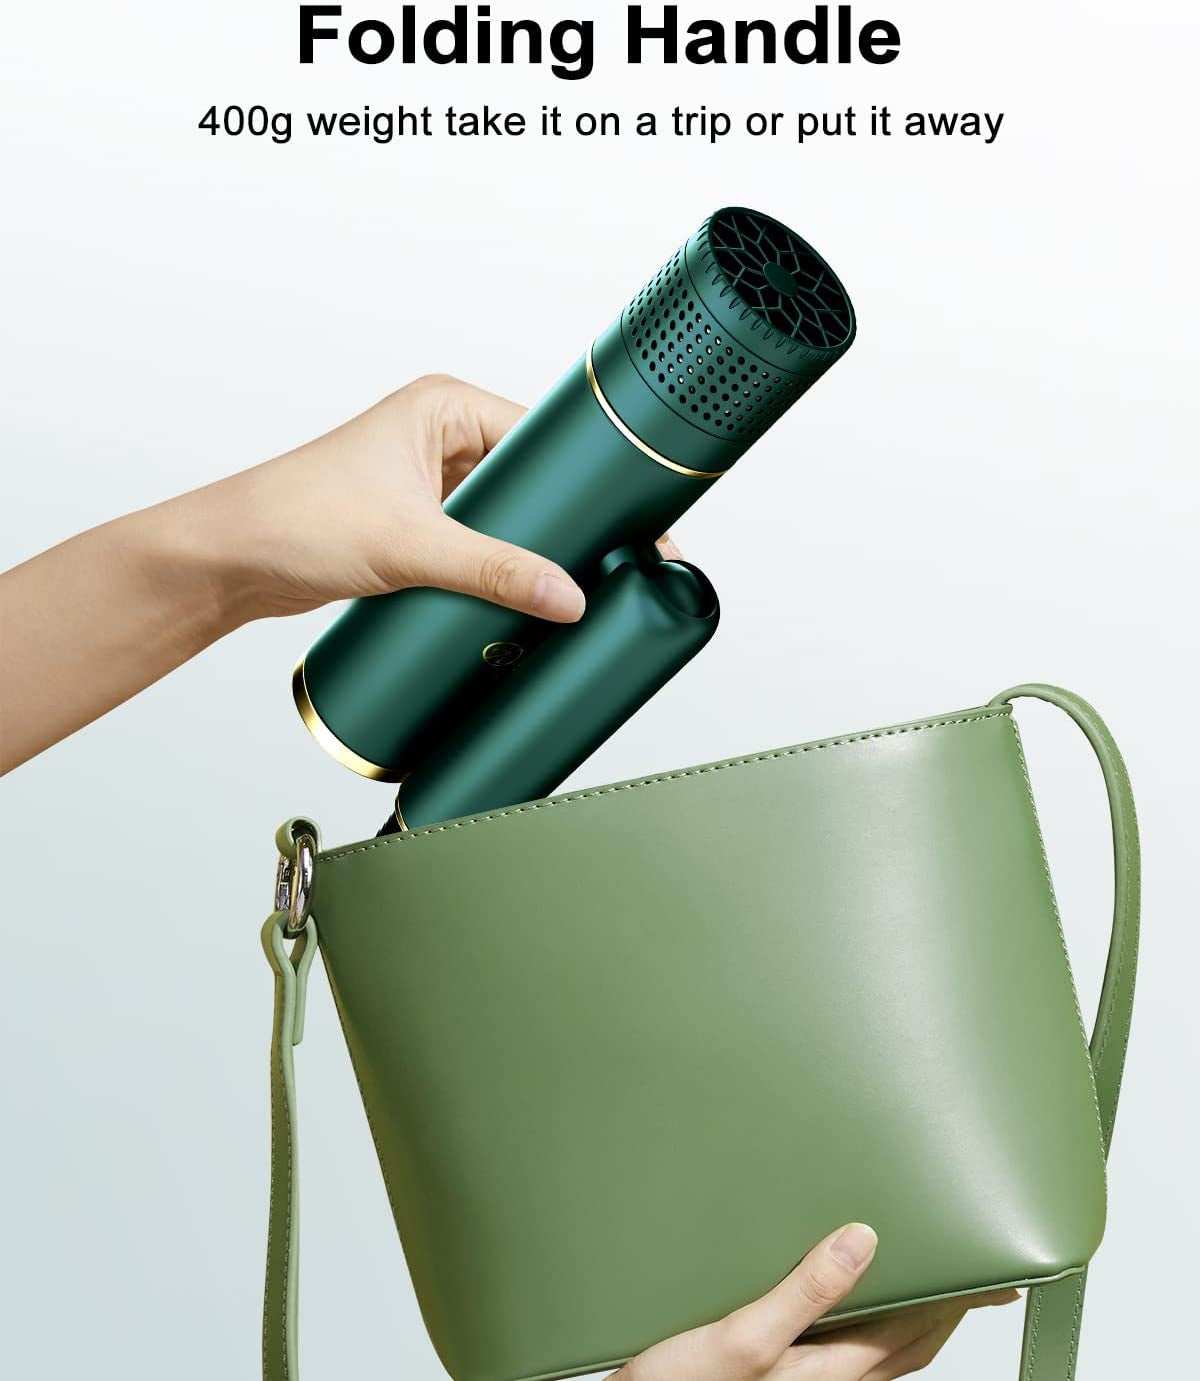 Fast-Drying Hair Dryer, Foldable Ionic Blow Dryer with Storage Bag for Travel, Lightweight Portable Hairdryer for Women & Men, Negative Hair Blow Dryer, 2 Heating/Cold/2 Speed Settings, Green